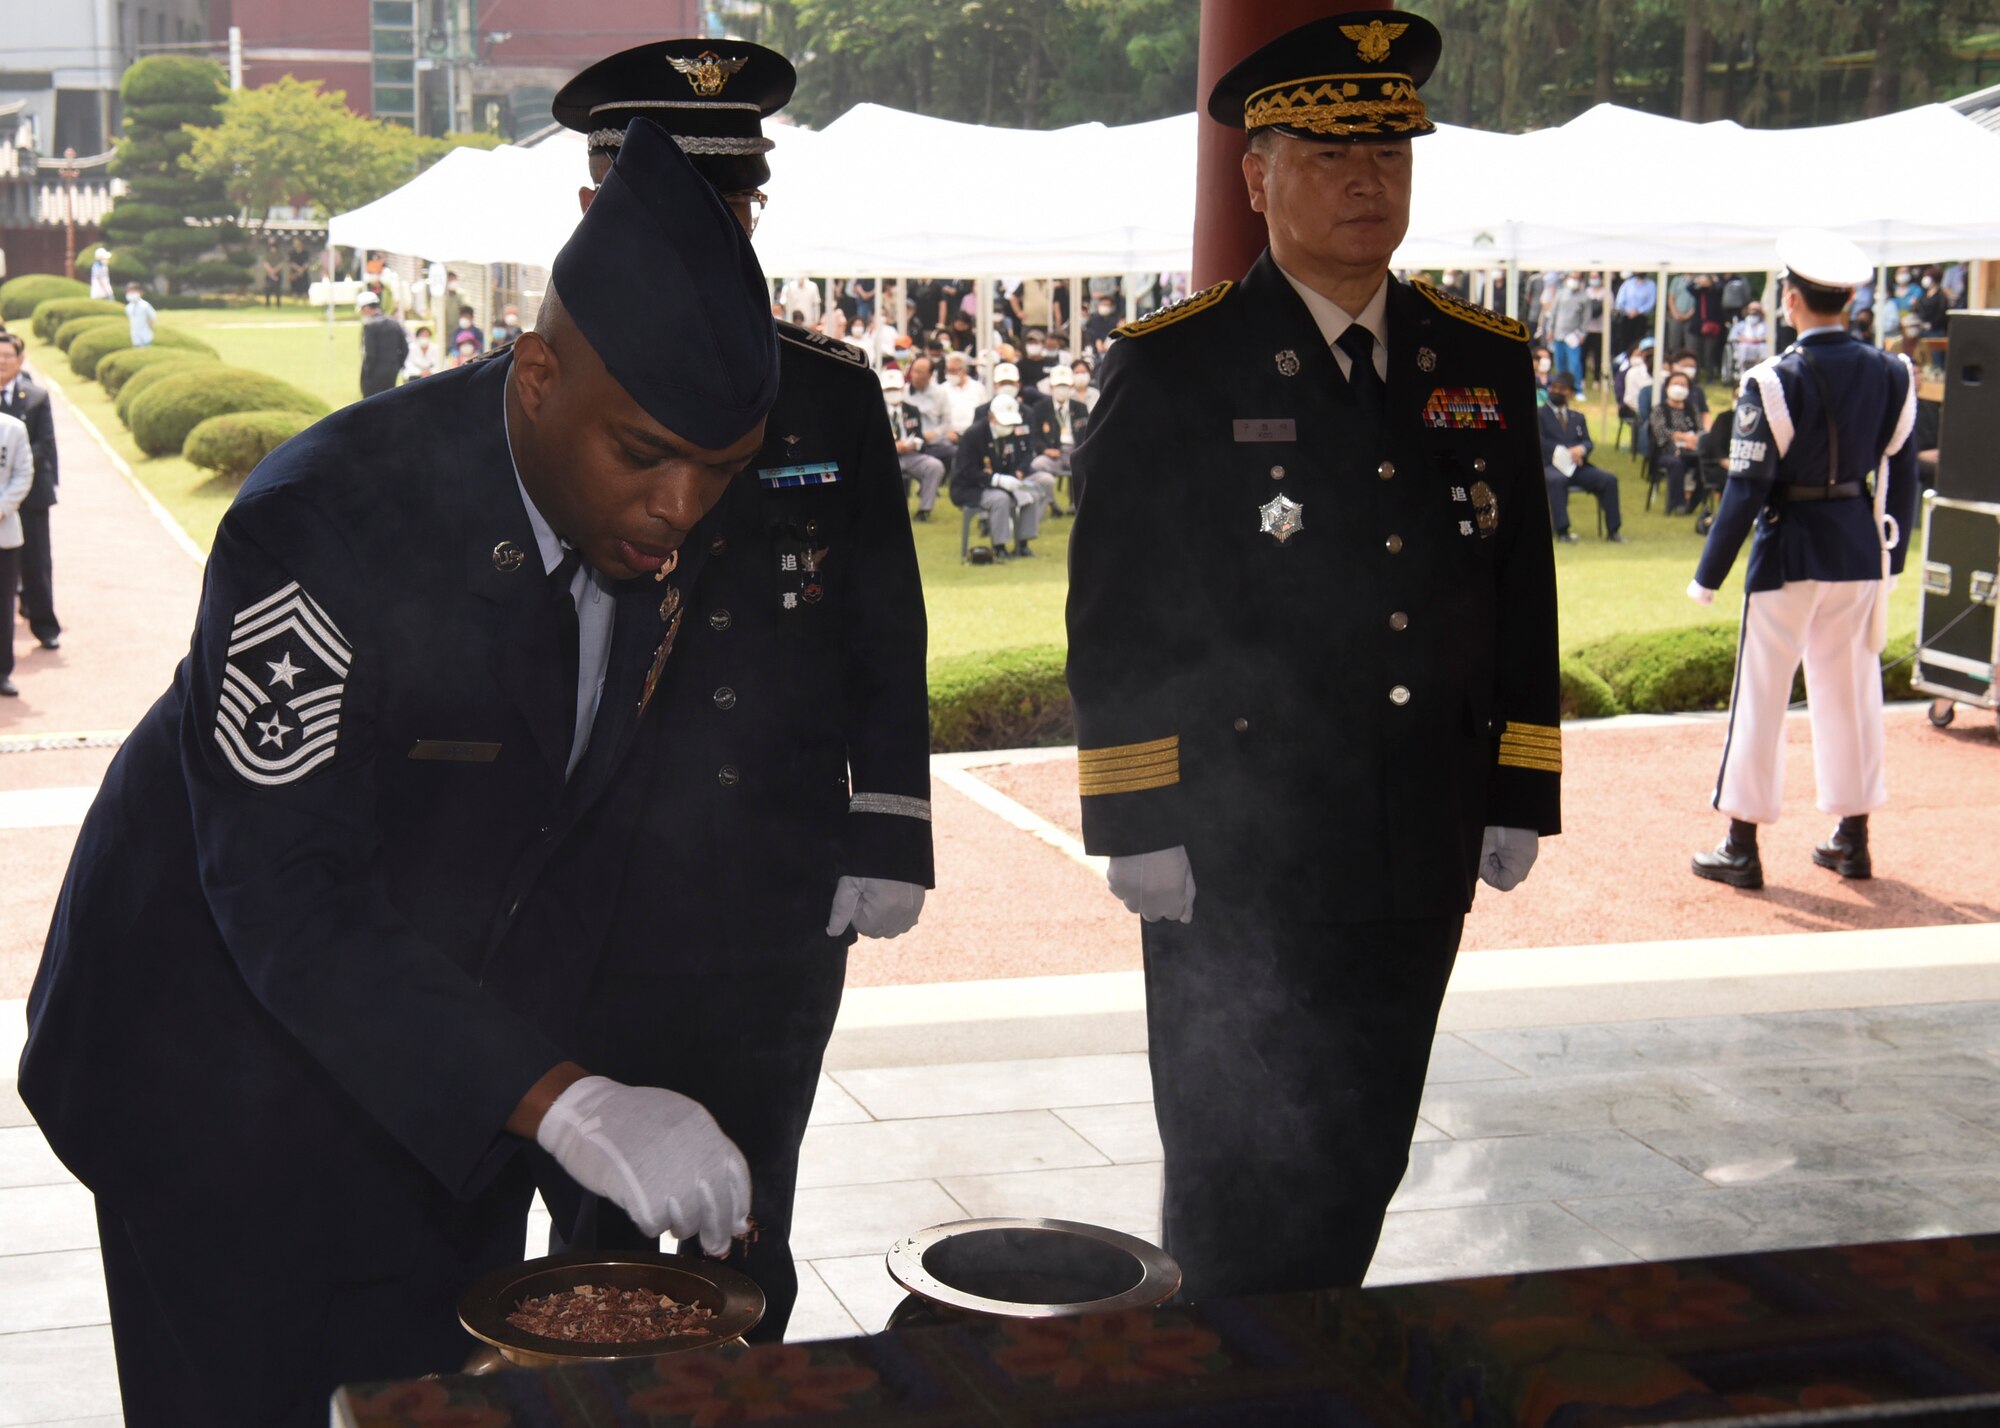 U.S. Air Force Chief Master Sgt. Ronnie Woods, 8th Fighter Wing command chief, pays his respects during the Korean Memorial Day ceremony at Gunsan City, Republic of Korea, June 6, 2020. Korean Memorial Day is a national holiday which commemorates the lives of Korean citizens who died while serving in the military and those who lost their lives during the independence movement. (U.S. Air Force photo by Staff Sgt. Anthony Hetlage)